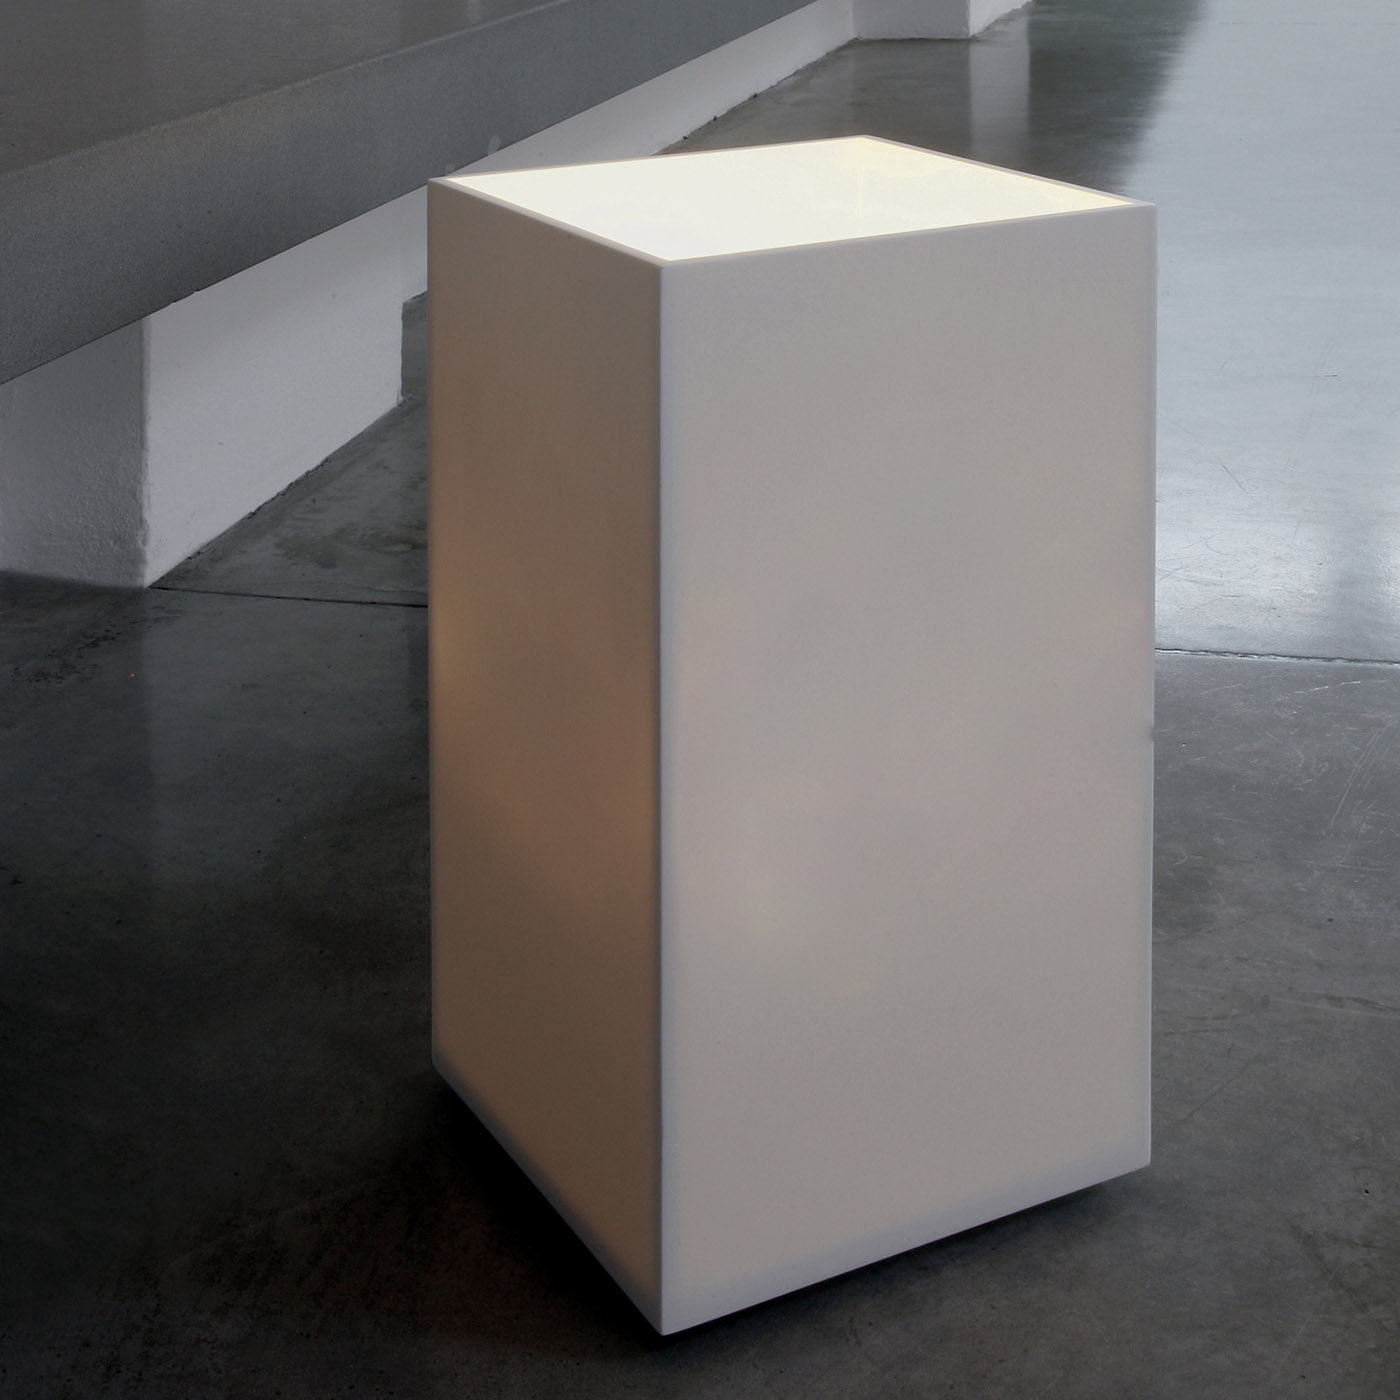 Light Gallery Luxury Cubo 400 White Floor Lamp by Marco Pollice - Alternative view 1